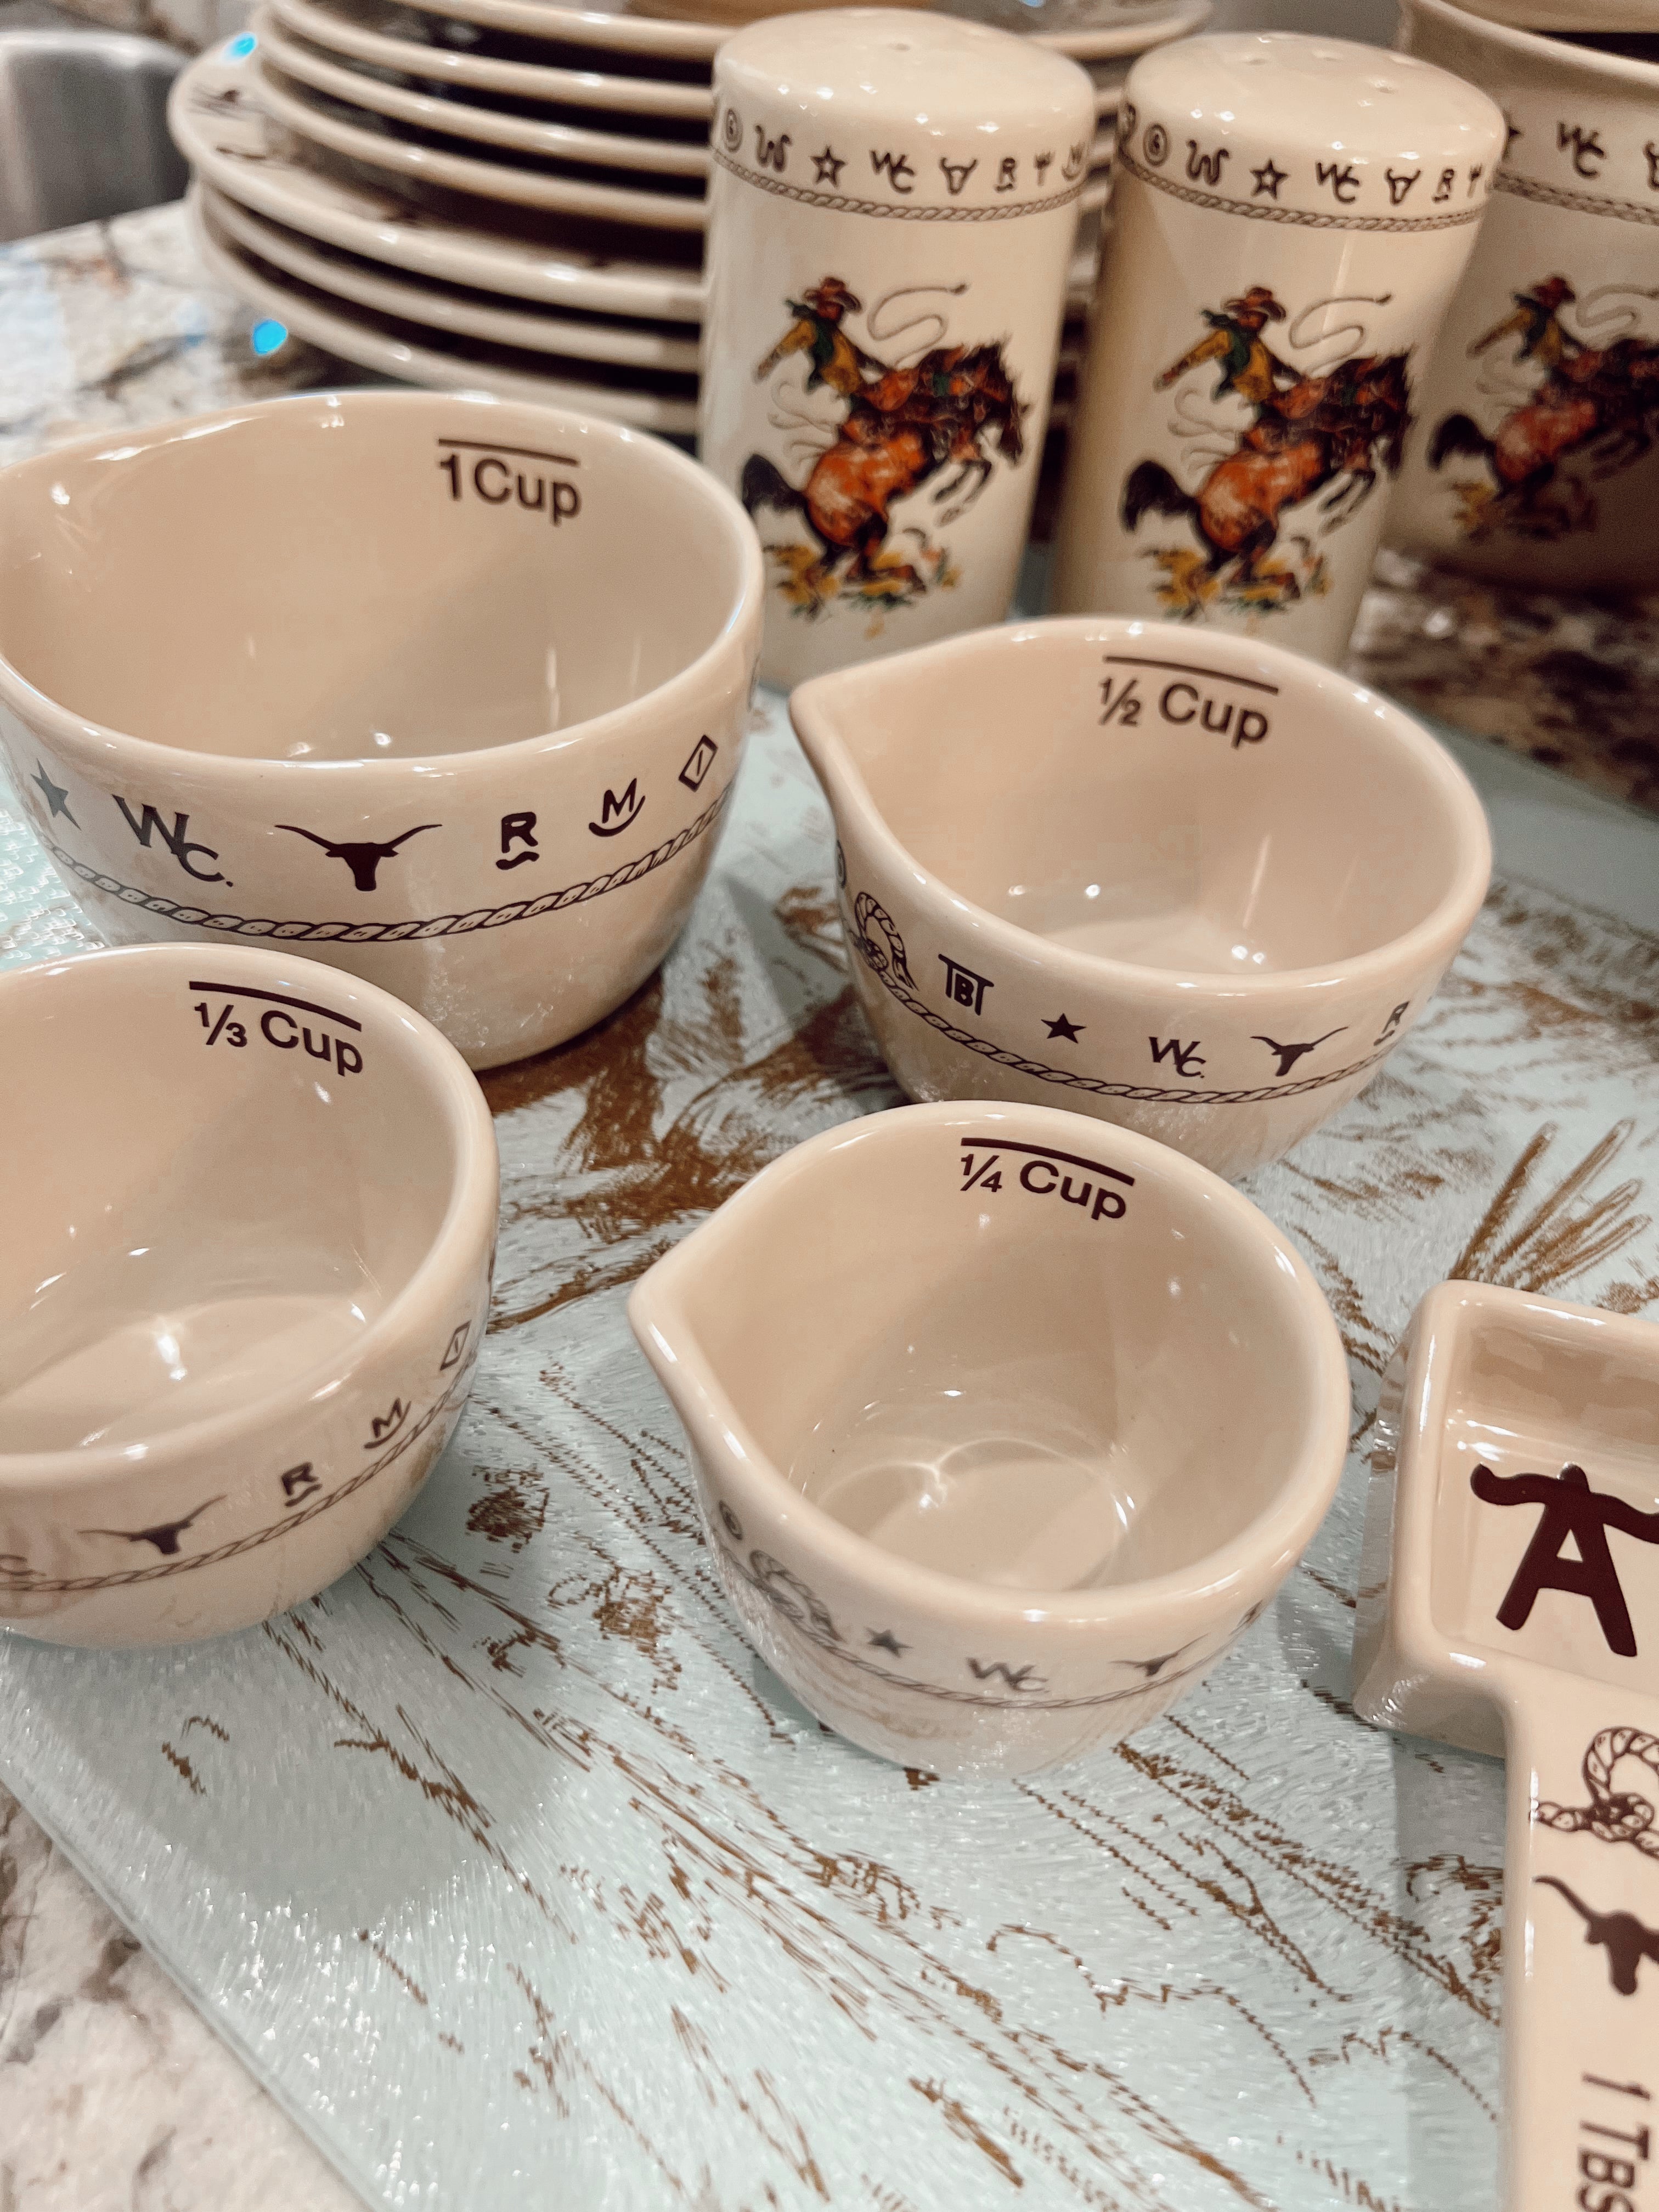 The Branded Measuring Cup Set